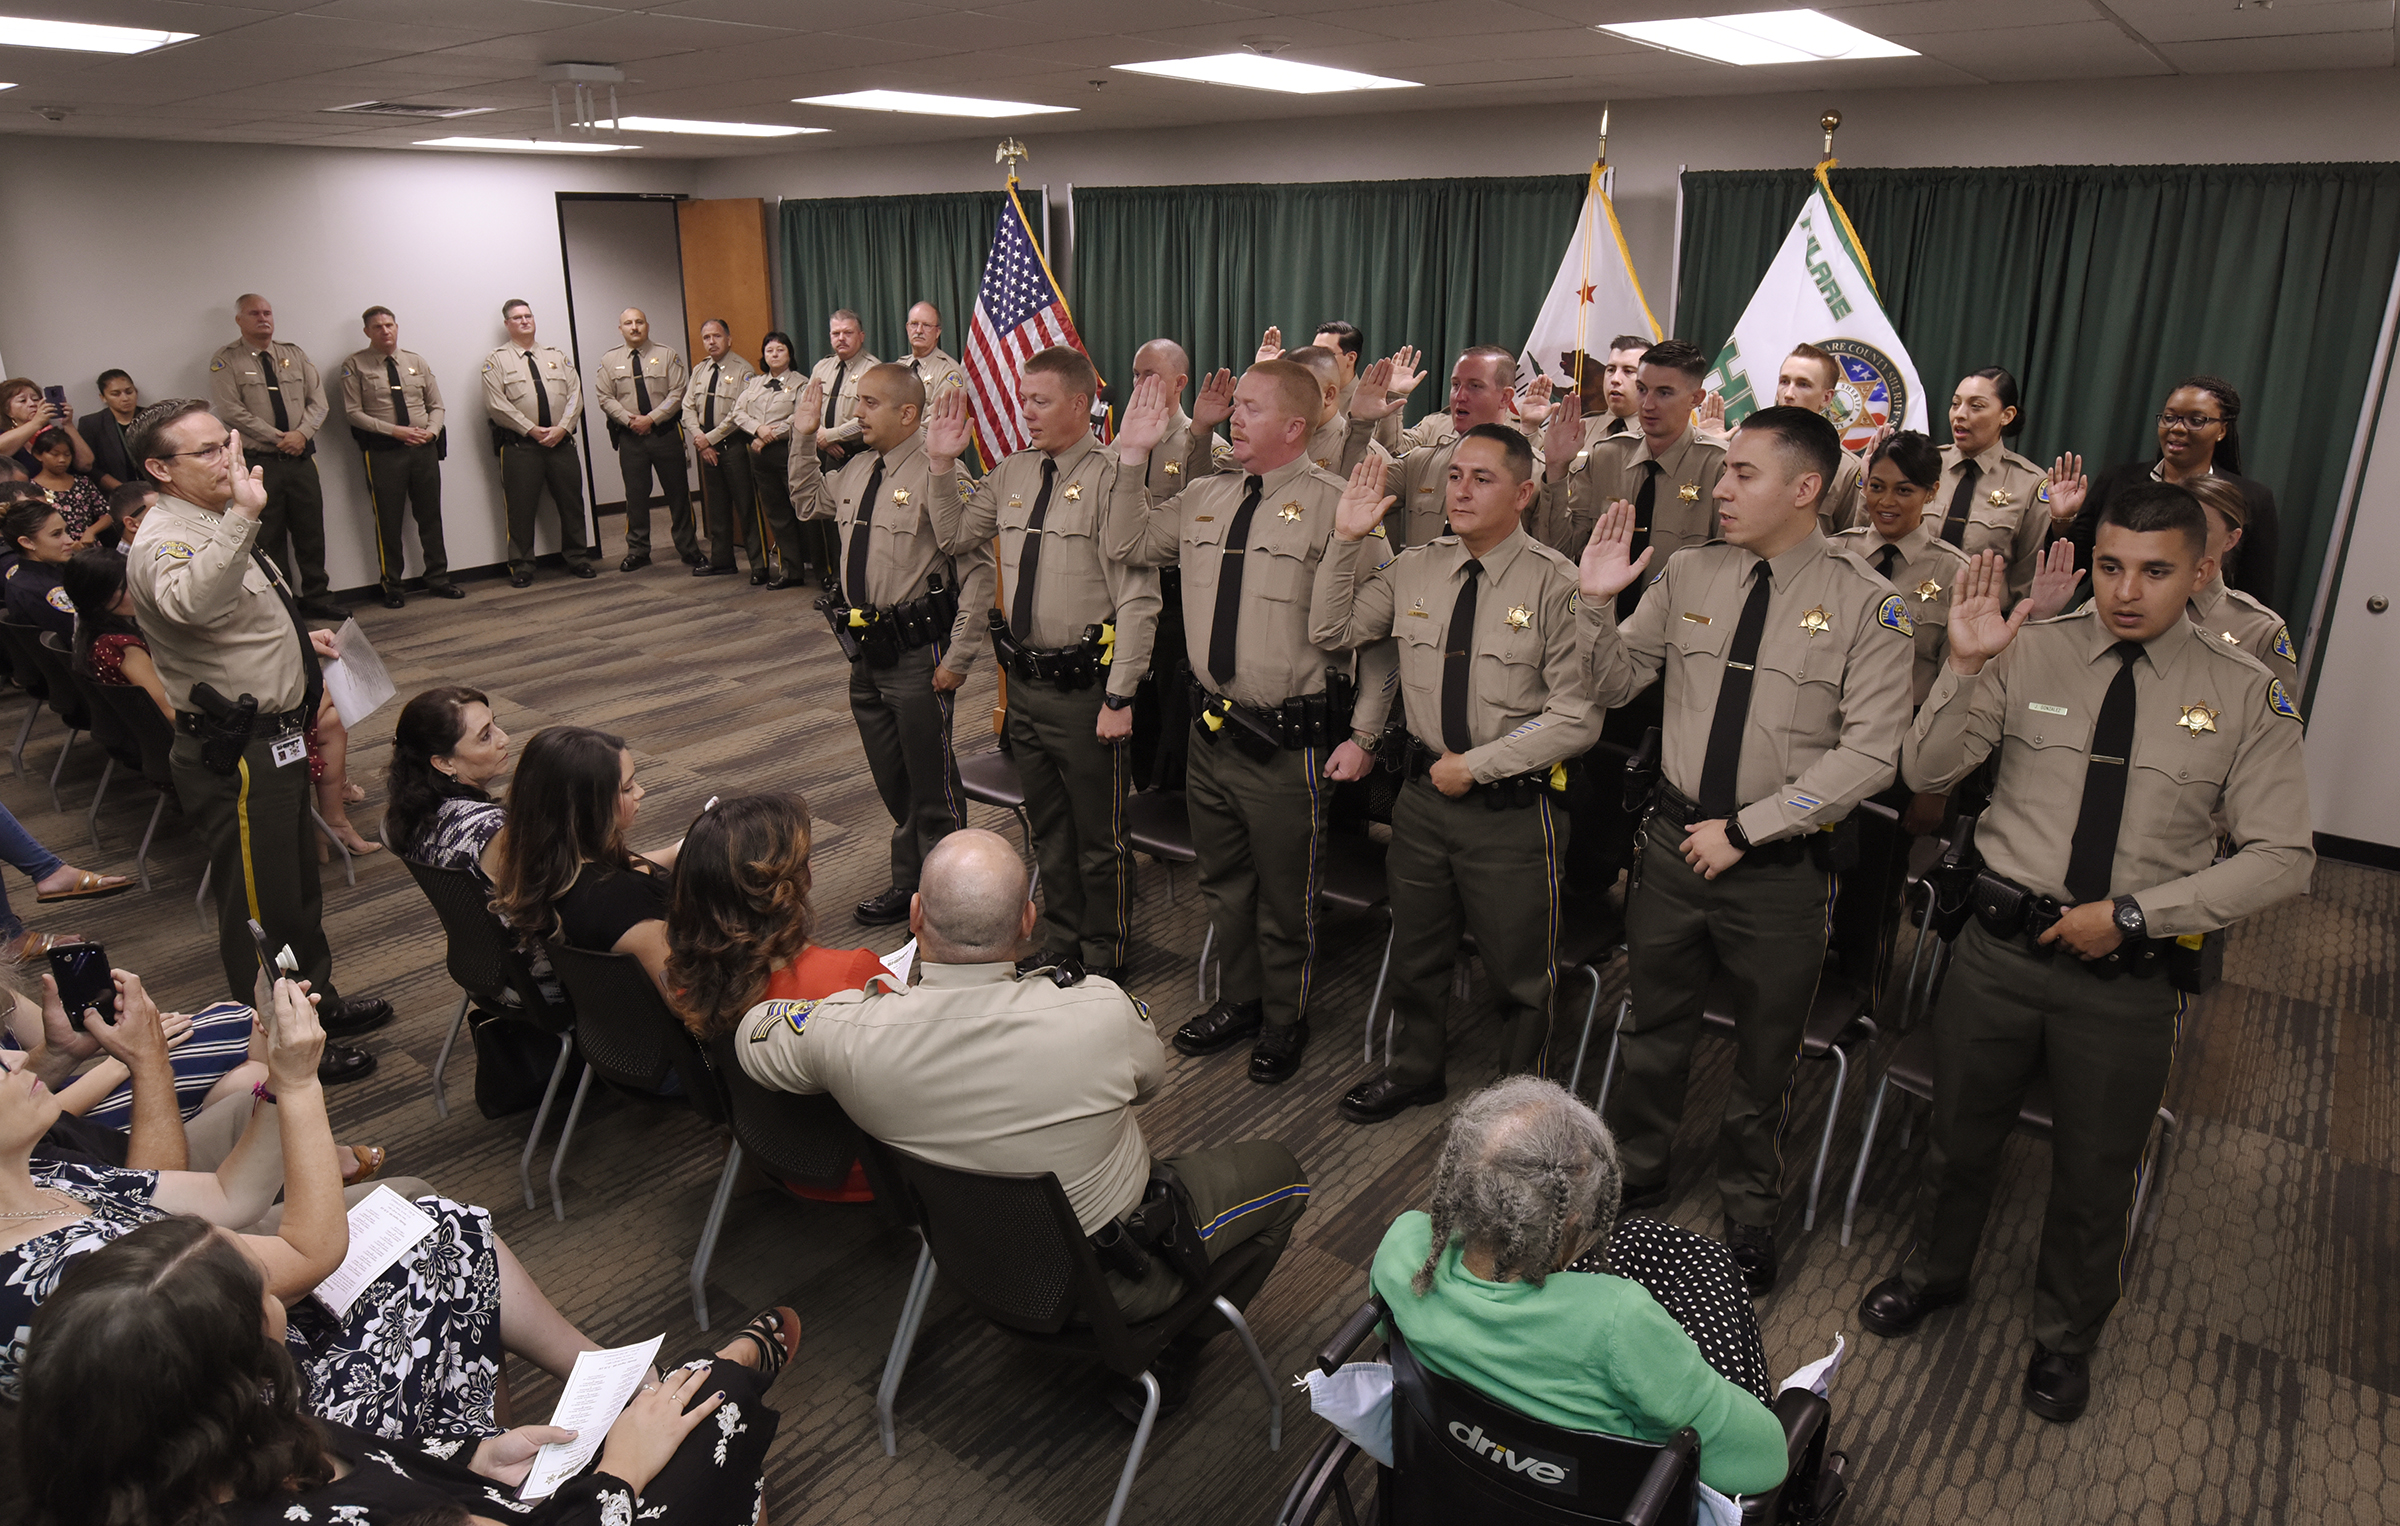 Sheriff Mike Boudreaux, pictured at left, with his right hand raised, swears in a large group of new deputies (three rows of uniformed men and women with their right hands raised) as a packed room of family, friends and colleagues look on.